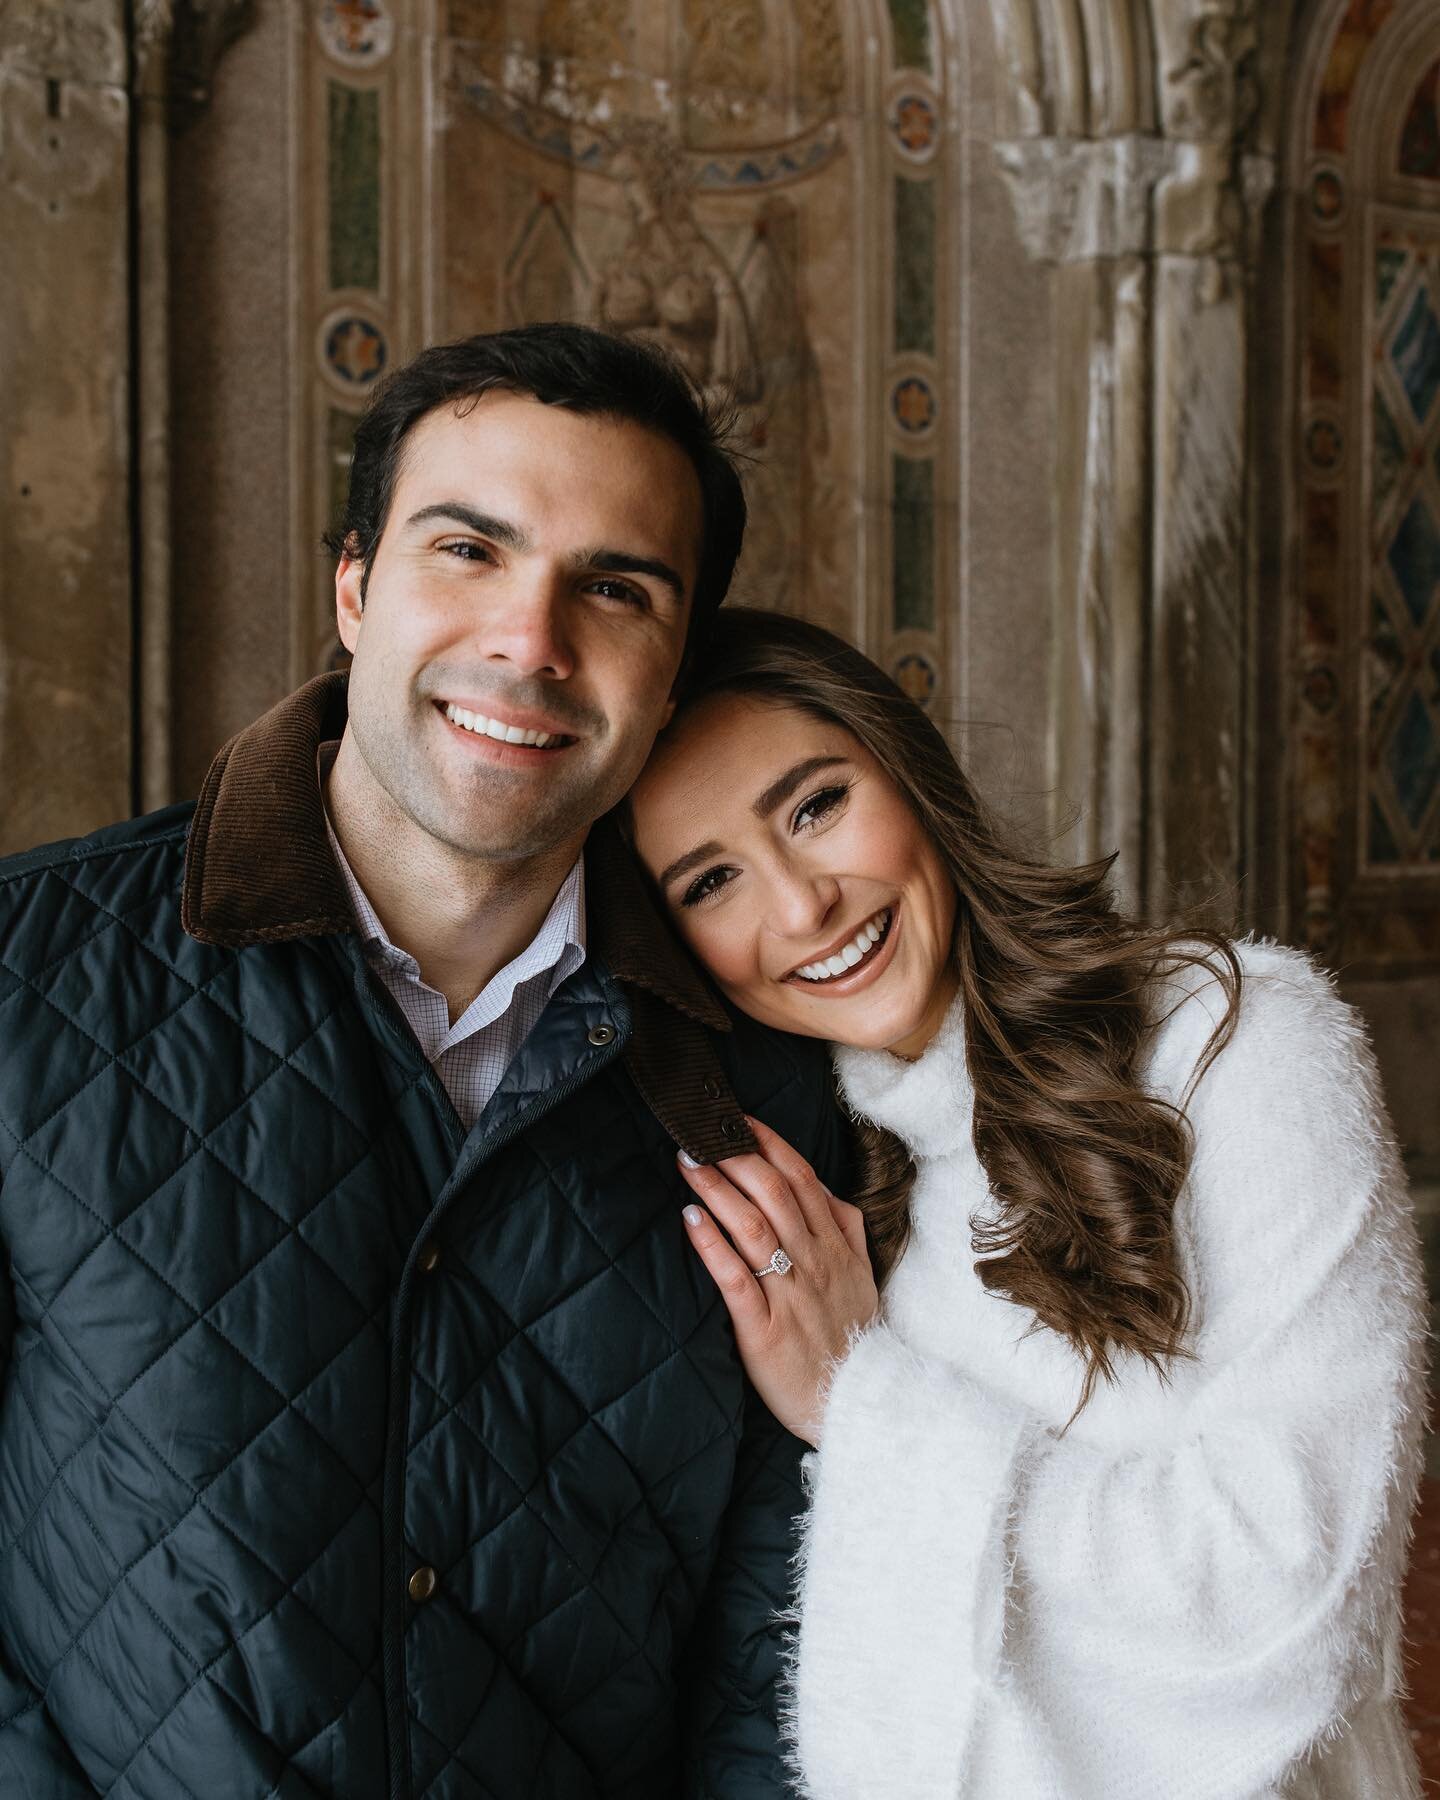 Shoutout to the couples like Lauren + Chad who are willing to brave the cold for engagement sessions in NYC!  Who&rsquo;s ready for warmer weather?!
.
.
.
.
#nycweddingphotography #nycphotographer #newyorkphotographer #newyorkweddingphotographer #nyc